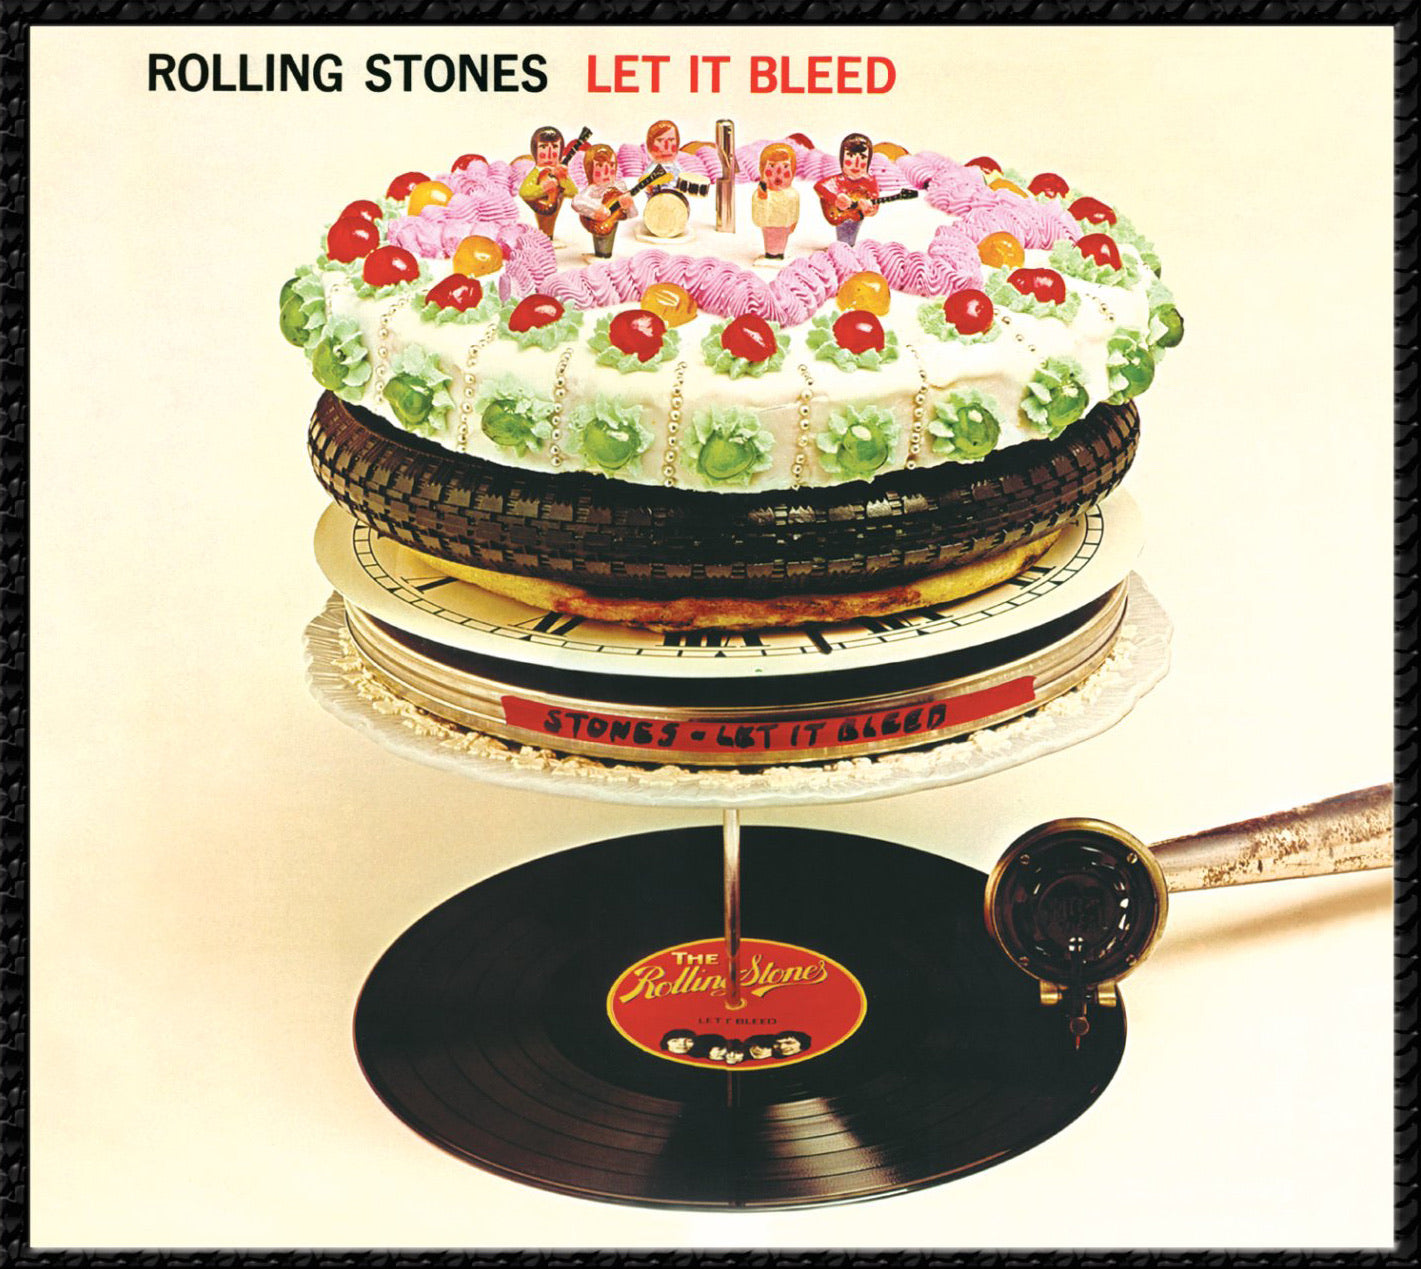 The Rolling Stones - Let It Bleed - 50th Anniversary Edition